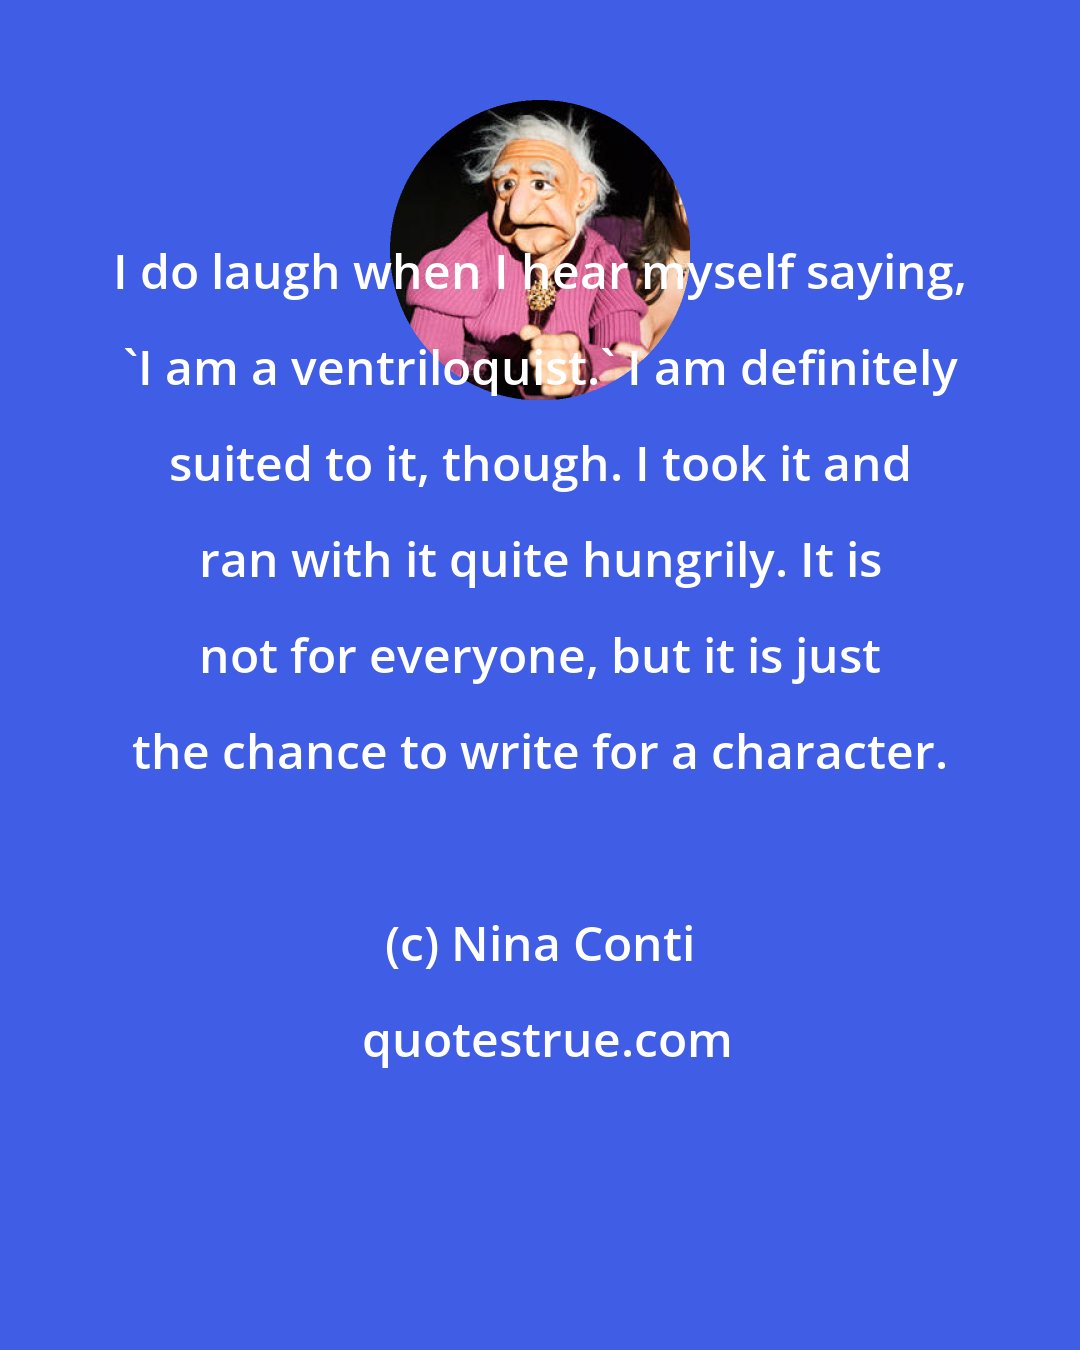 Nina Conti: I do laugh when I hear myself saying, 'I am a ventriloquist.' I am definitely suited to it, though. I took it and ran with it quite hungrily. It is not for everyone, but it is just the chance to write for a character.